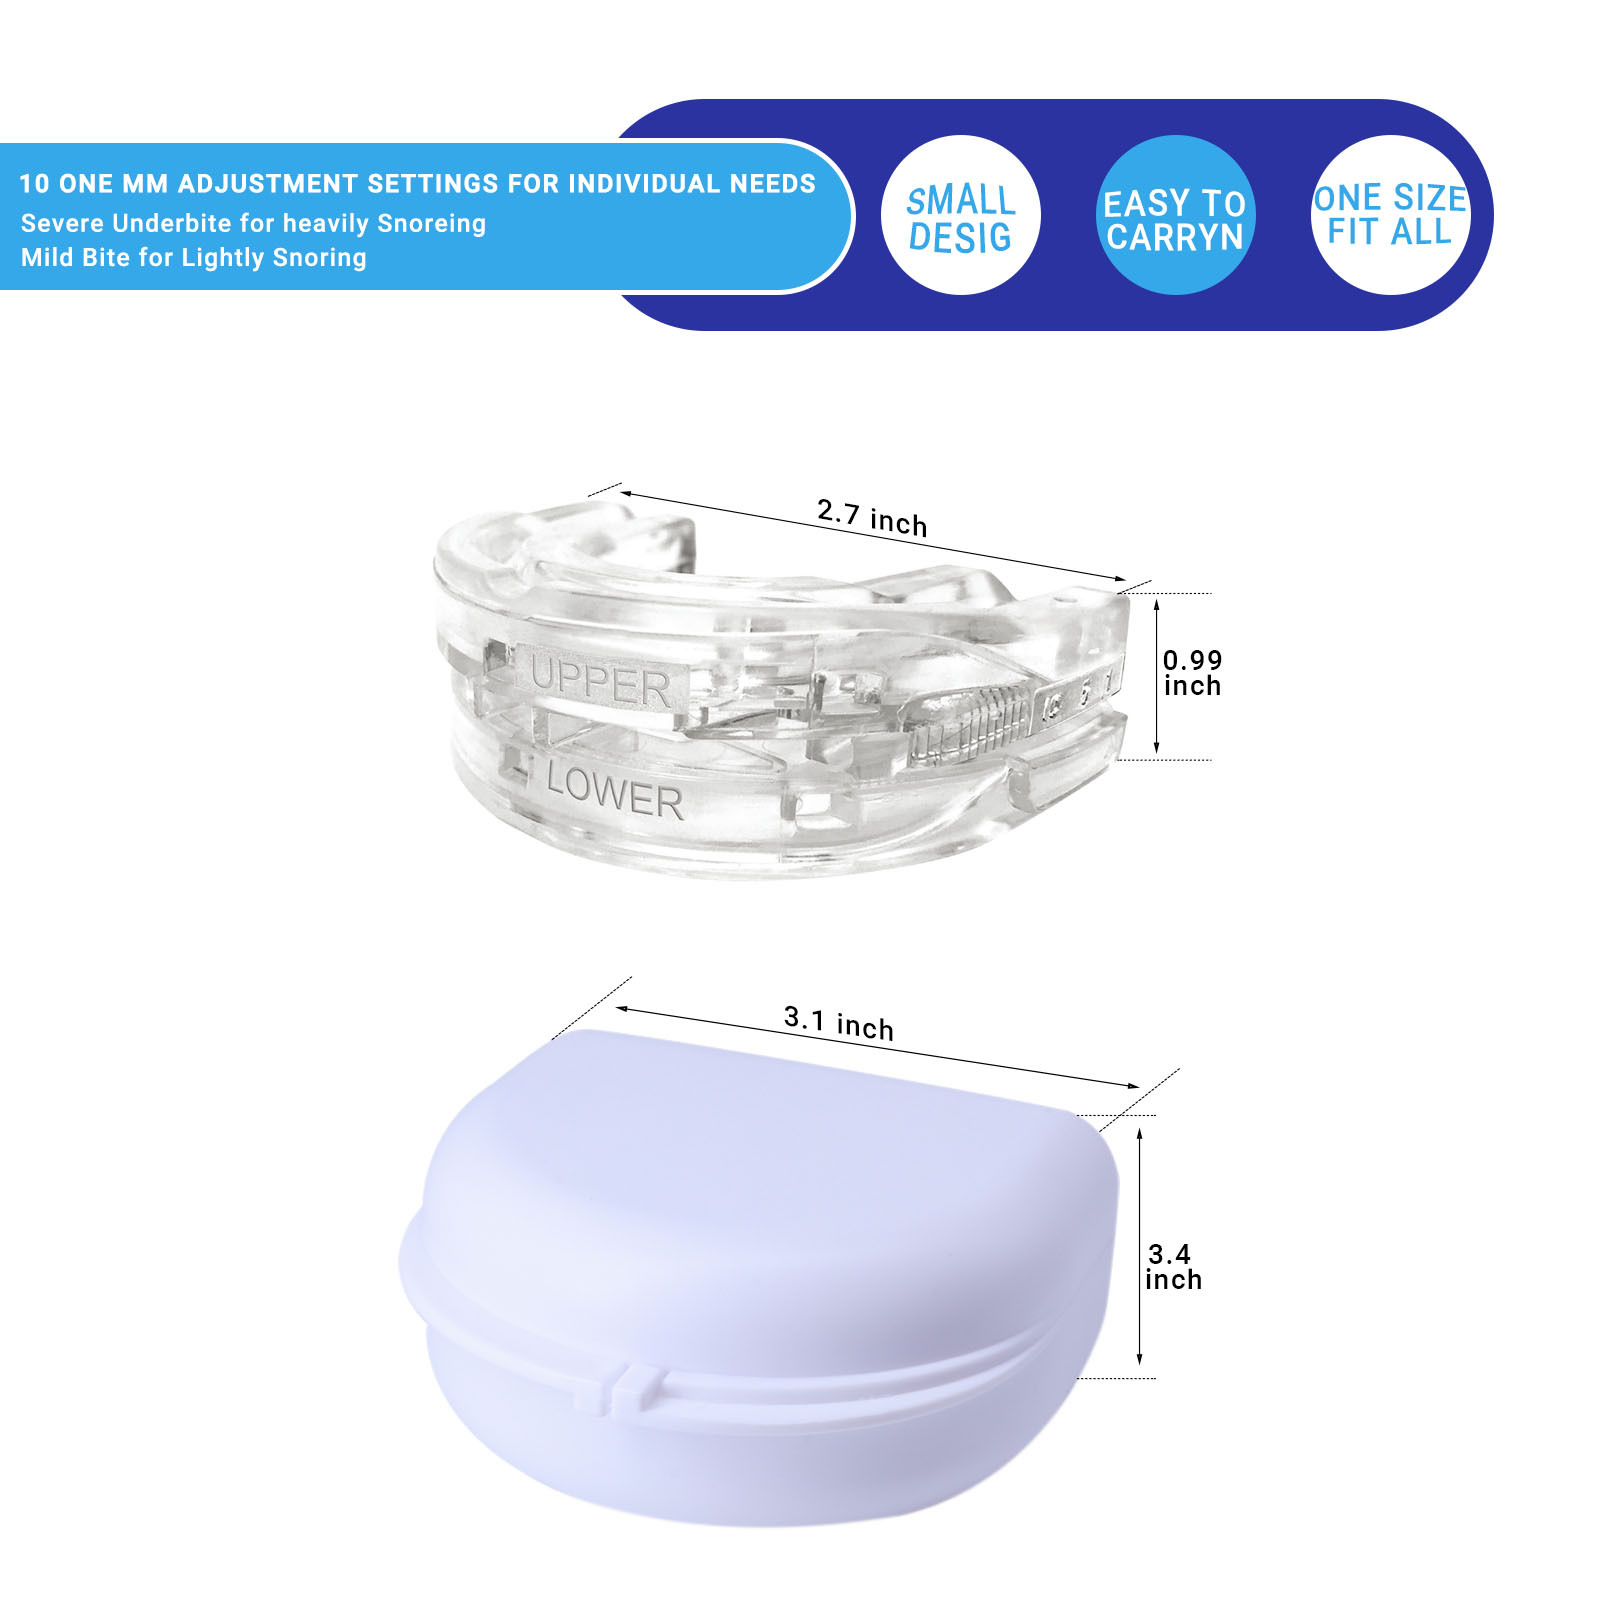 Combat snoring with our Adjustable Braces Mouthpiece—max comfort, minimal noise for a restful night's sleep! image 5